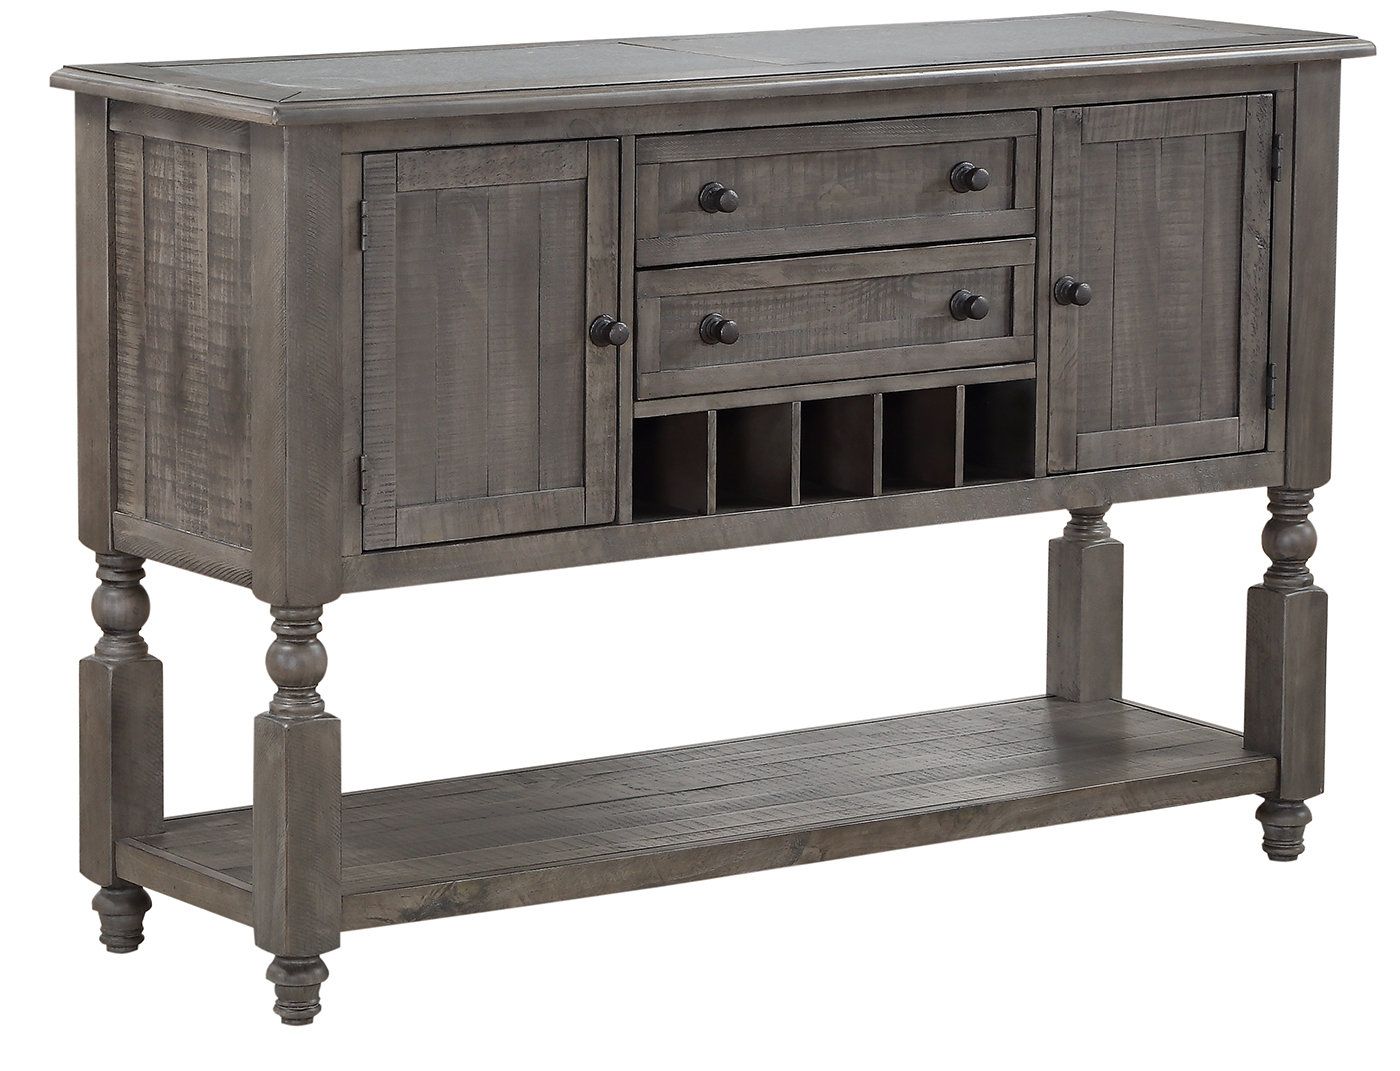 Gray Wood Sideboards & Buffets | Joss & Main Within Cazenovia Charnley Sideboards (View 6 of 20)